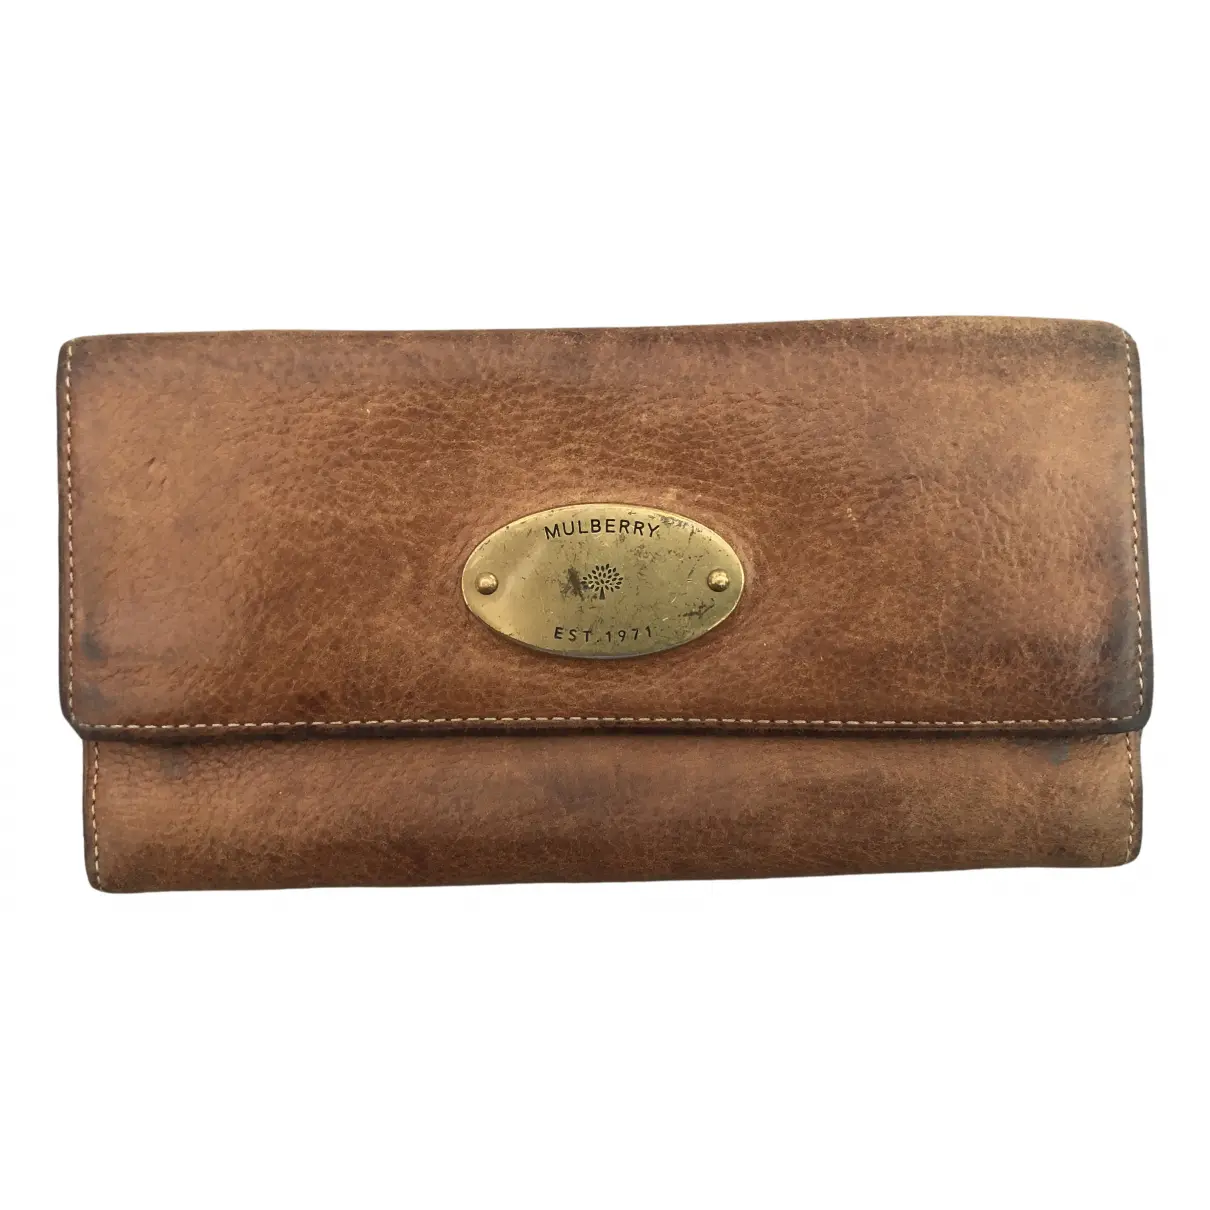 Leather wallet Mulberry - Vintage